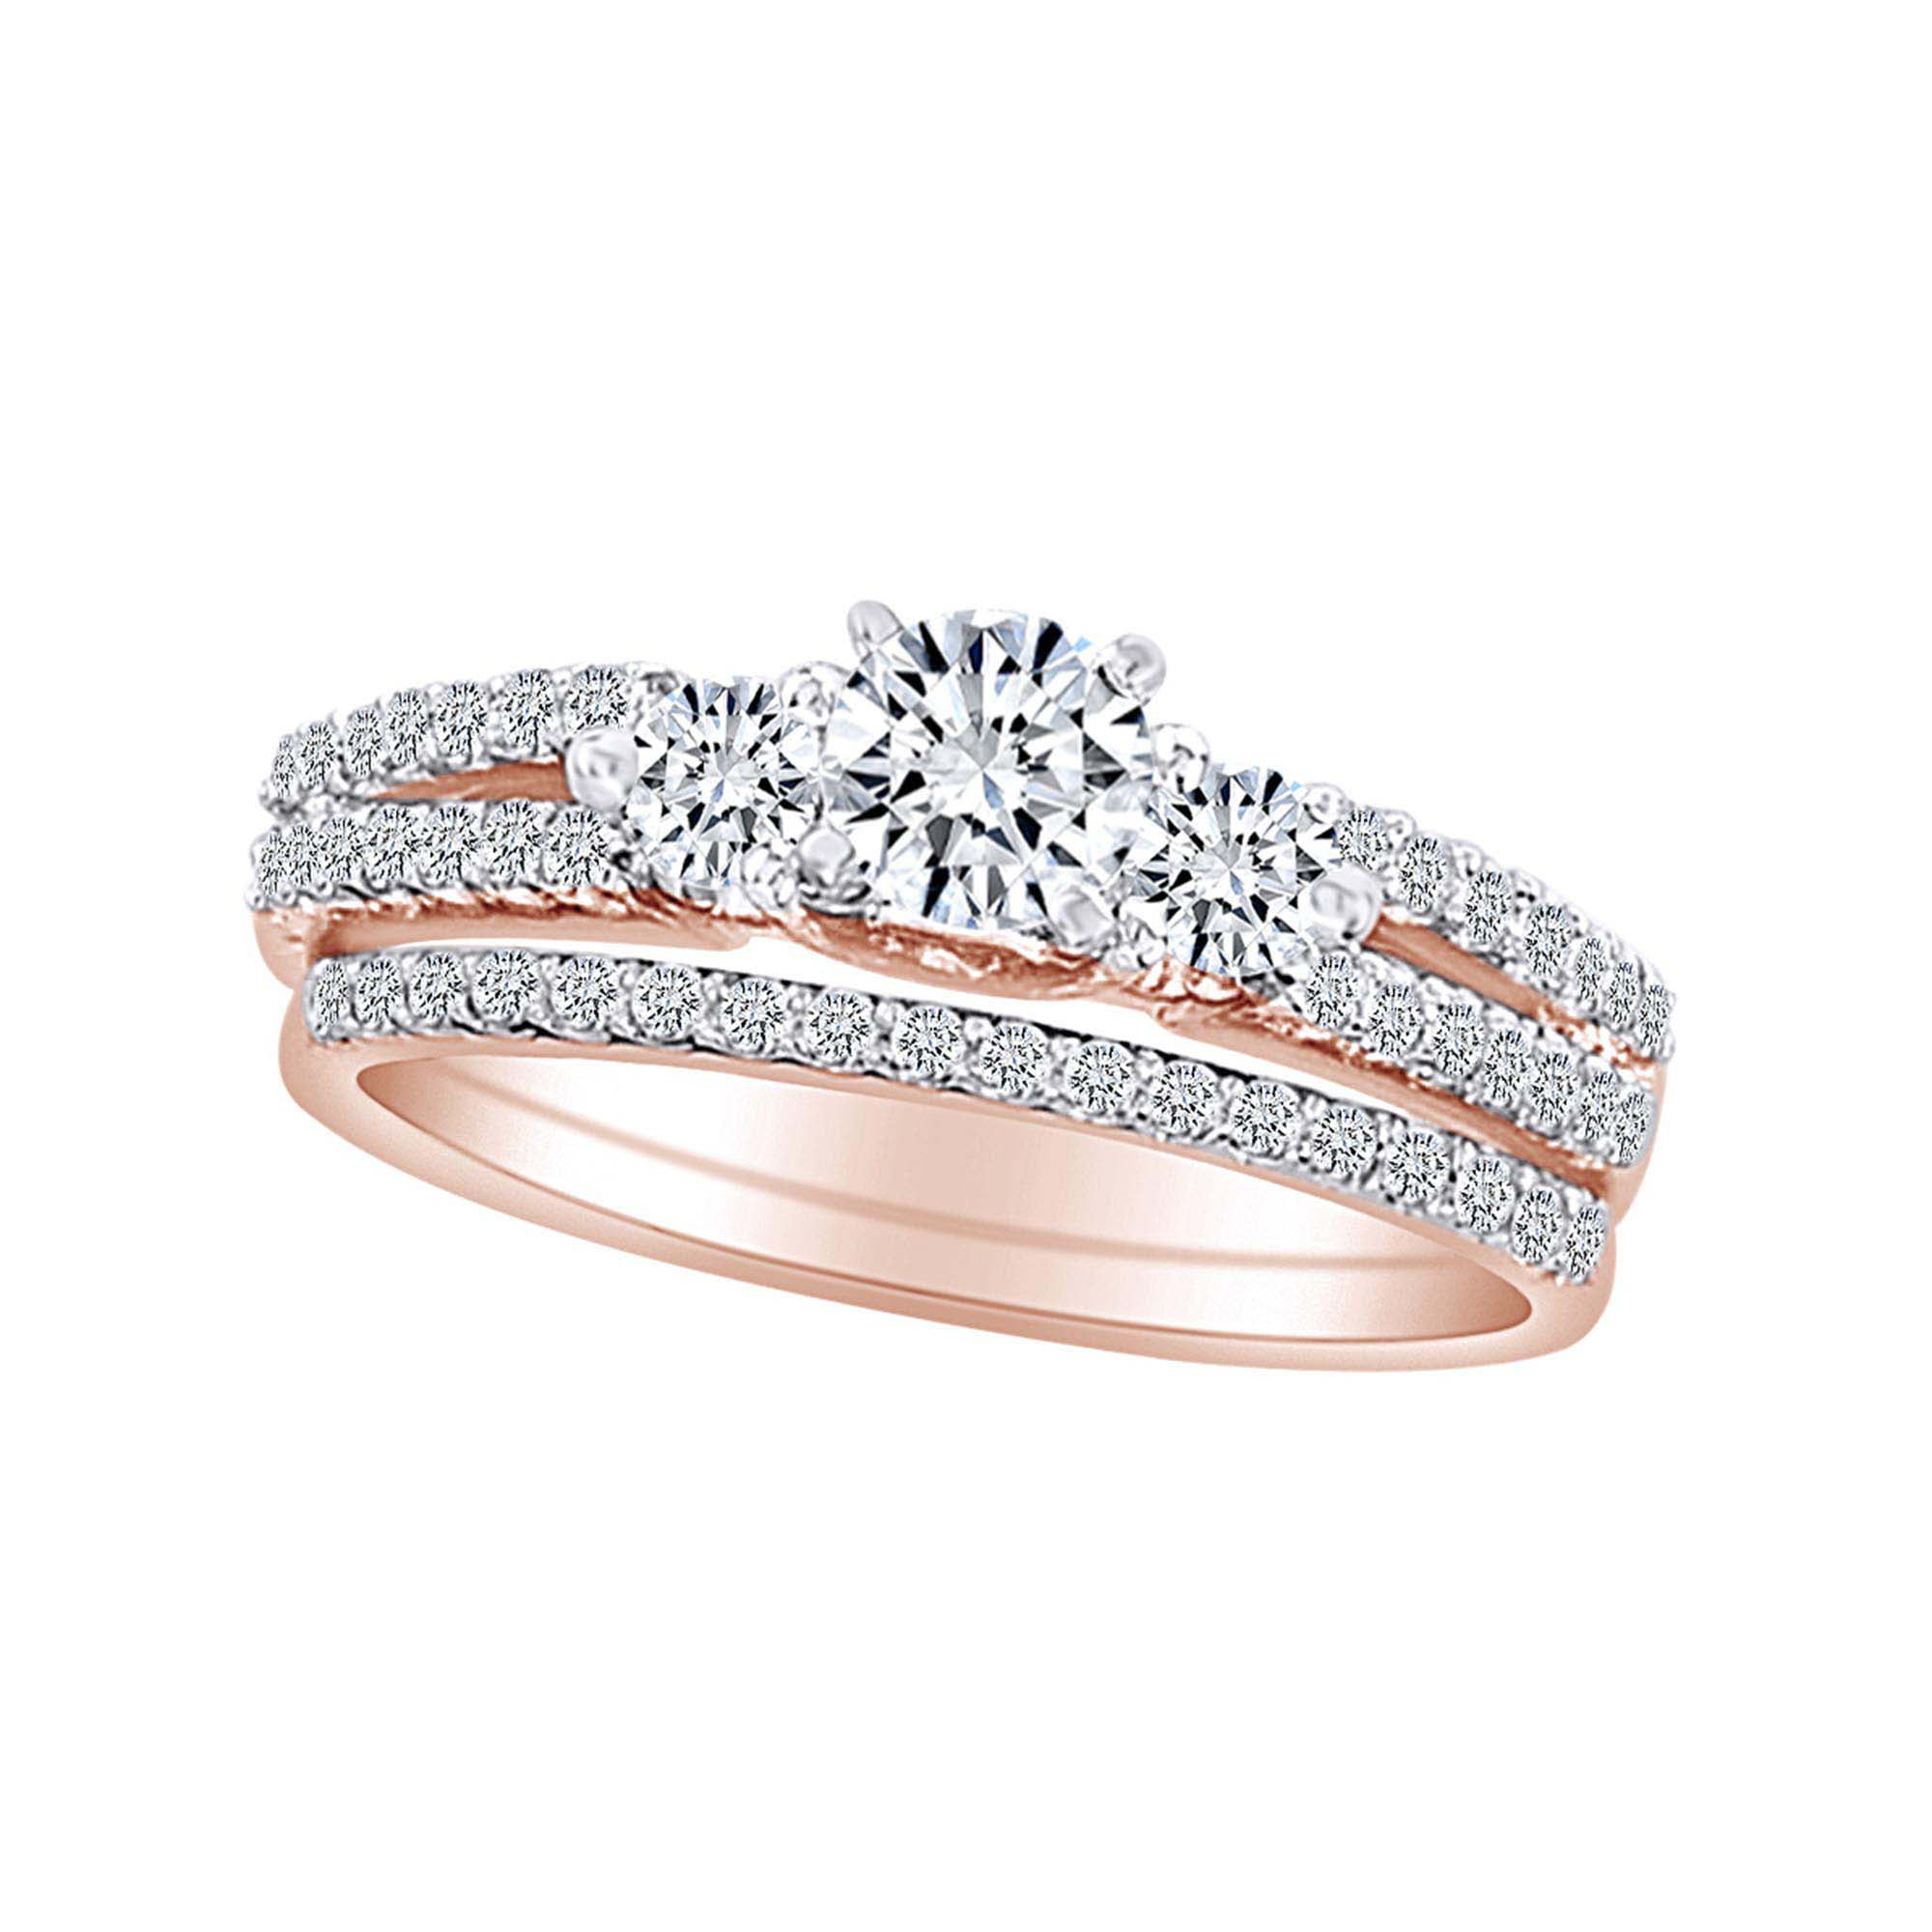 Details about   1.75ct Diamond Wedding Band 14k Rose Gold Over Women Engagement Ring Solitaire 